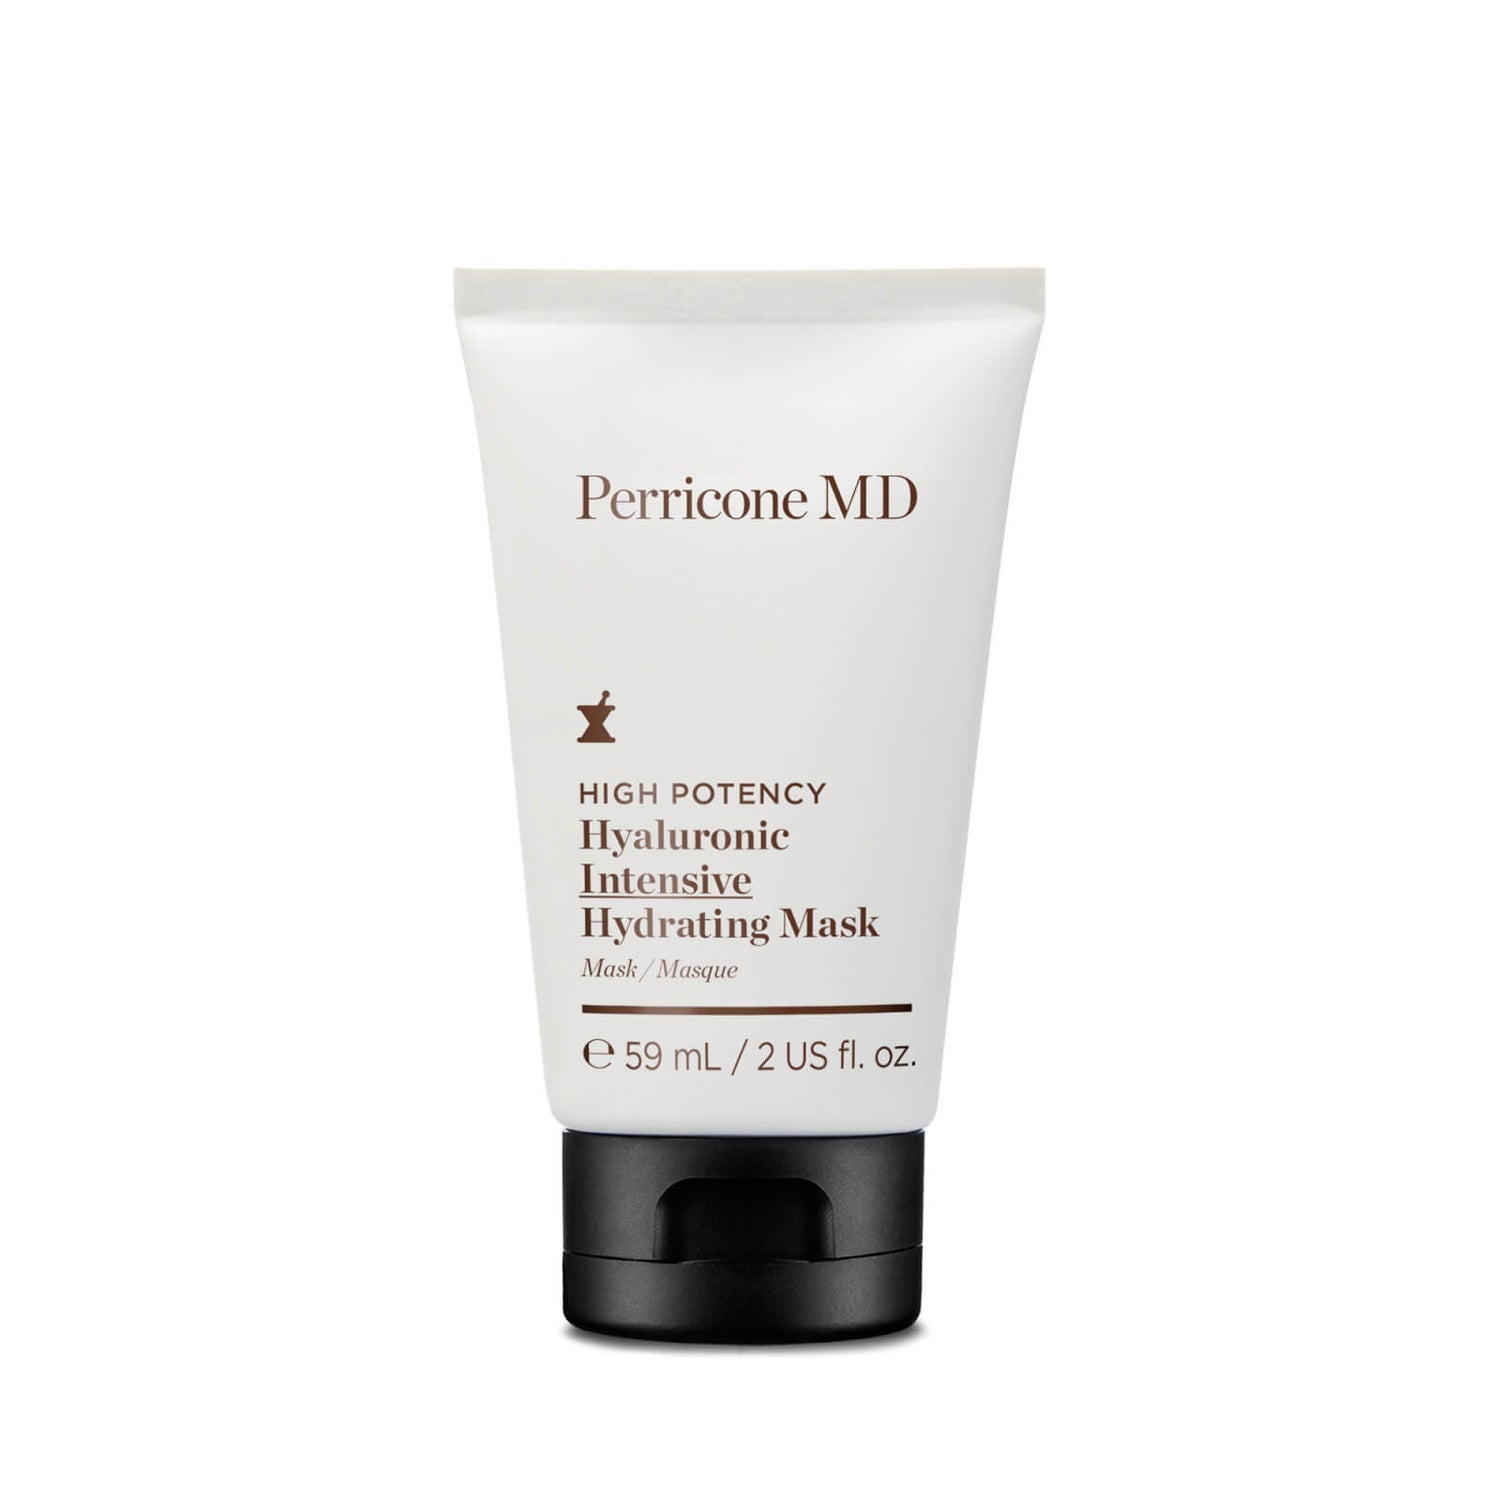 Perricone MD High Potency Hyaluronic Intensive Hydrating Mask 59ml